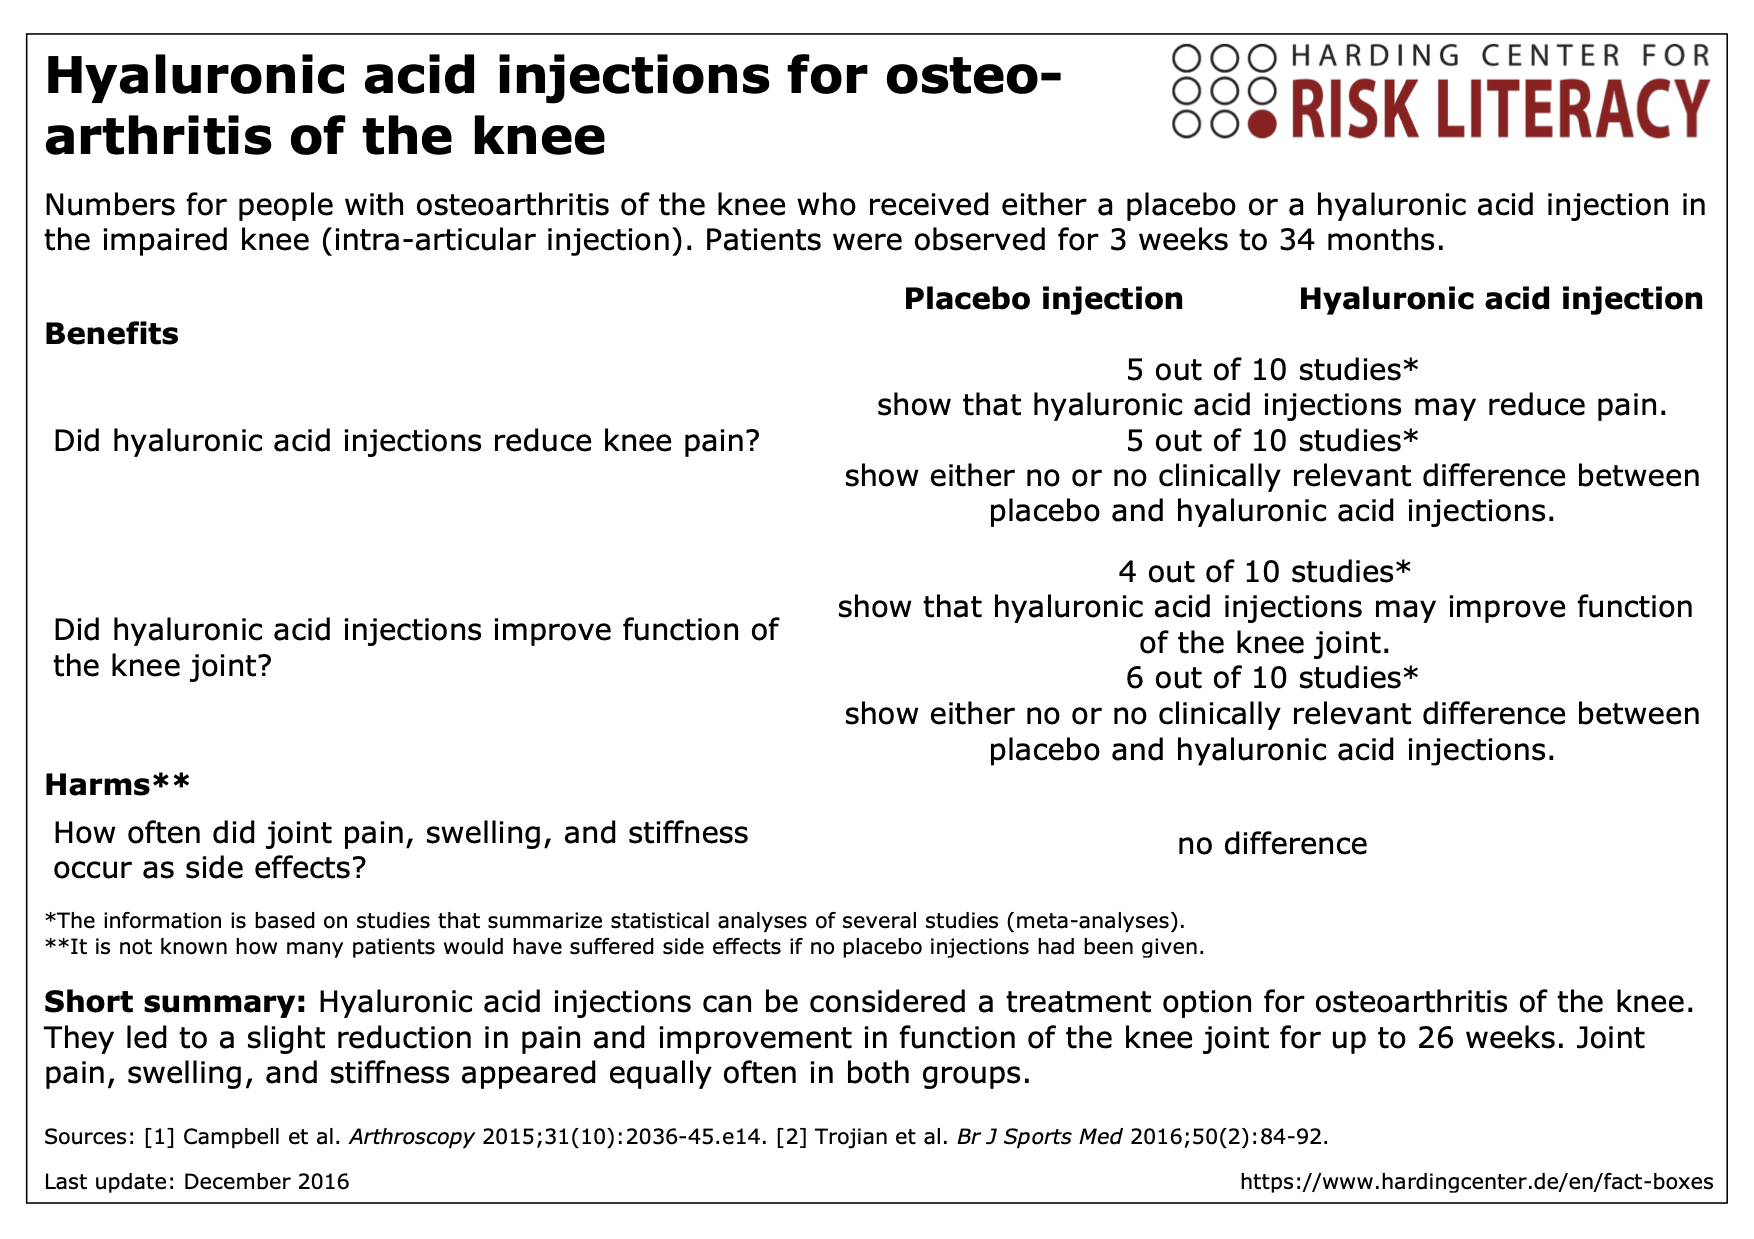 Fact box hyaluronic acid injections for osteoarthritis of the knee